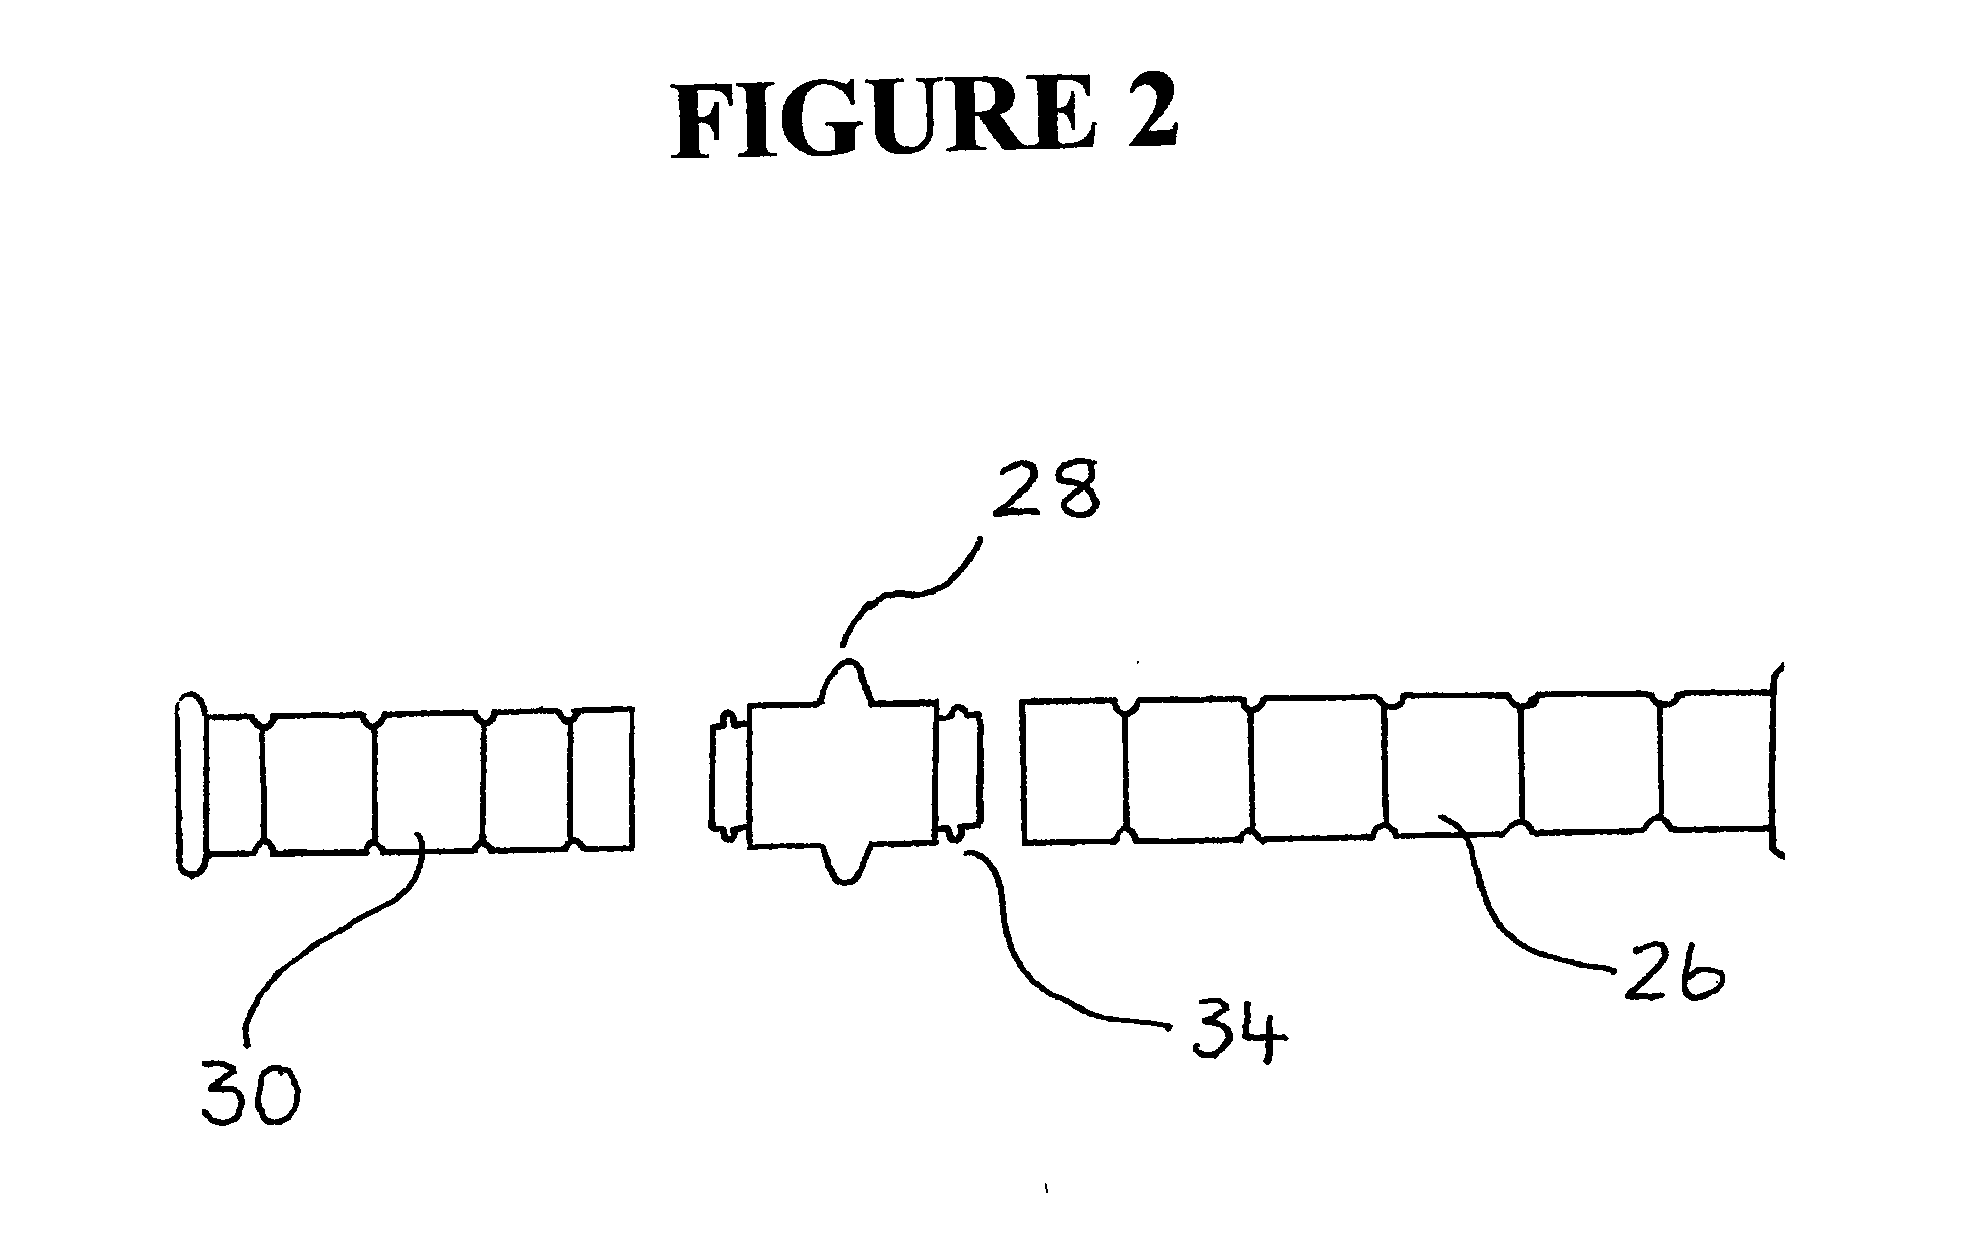 Rapid exchange fna biopsy device with diagnostic and therapeutic capabilities